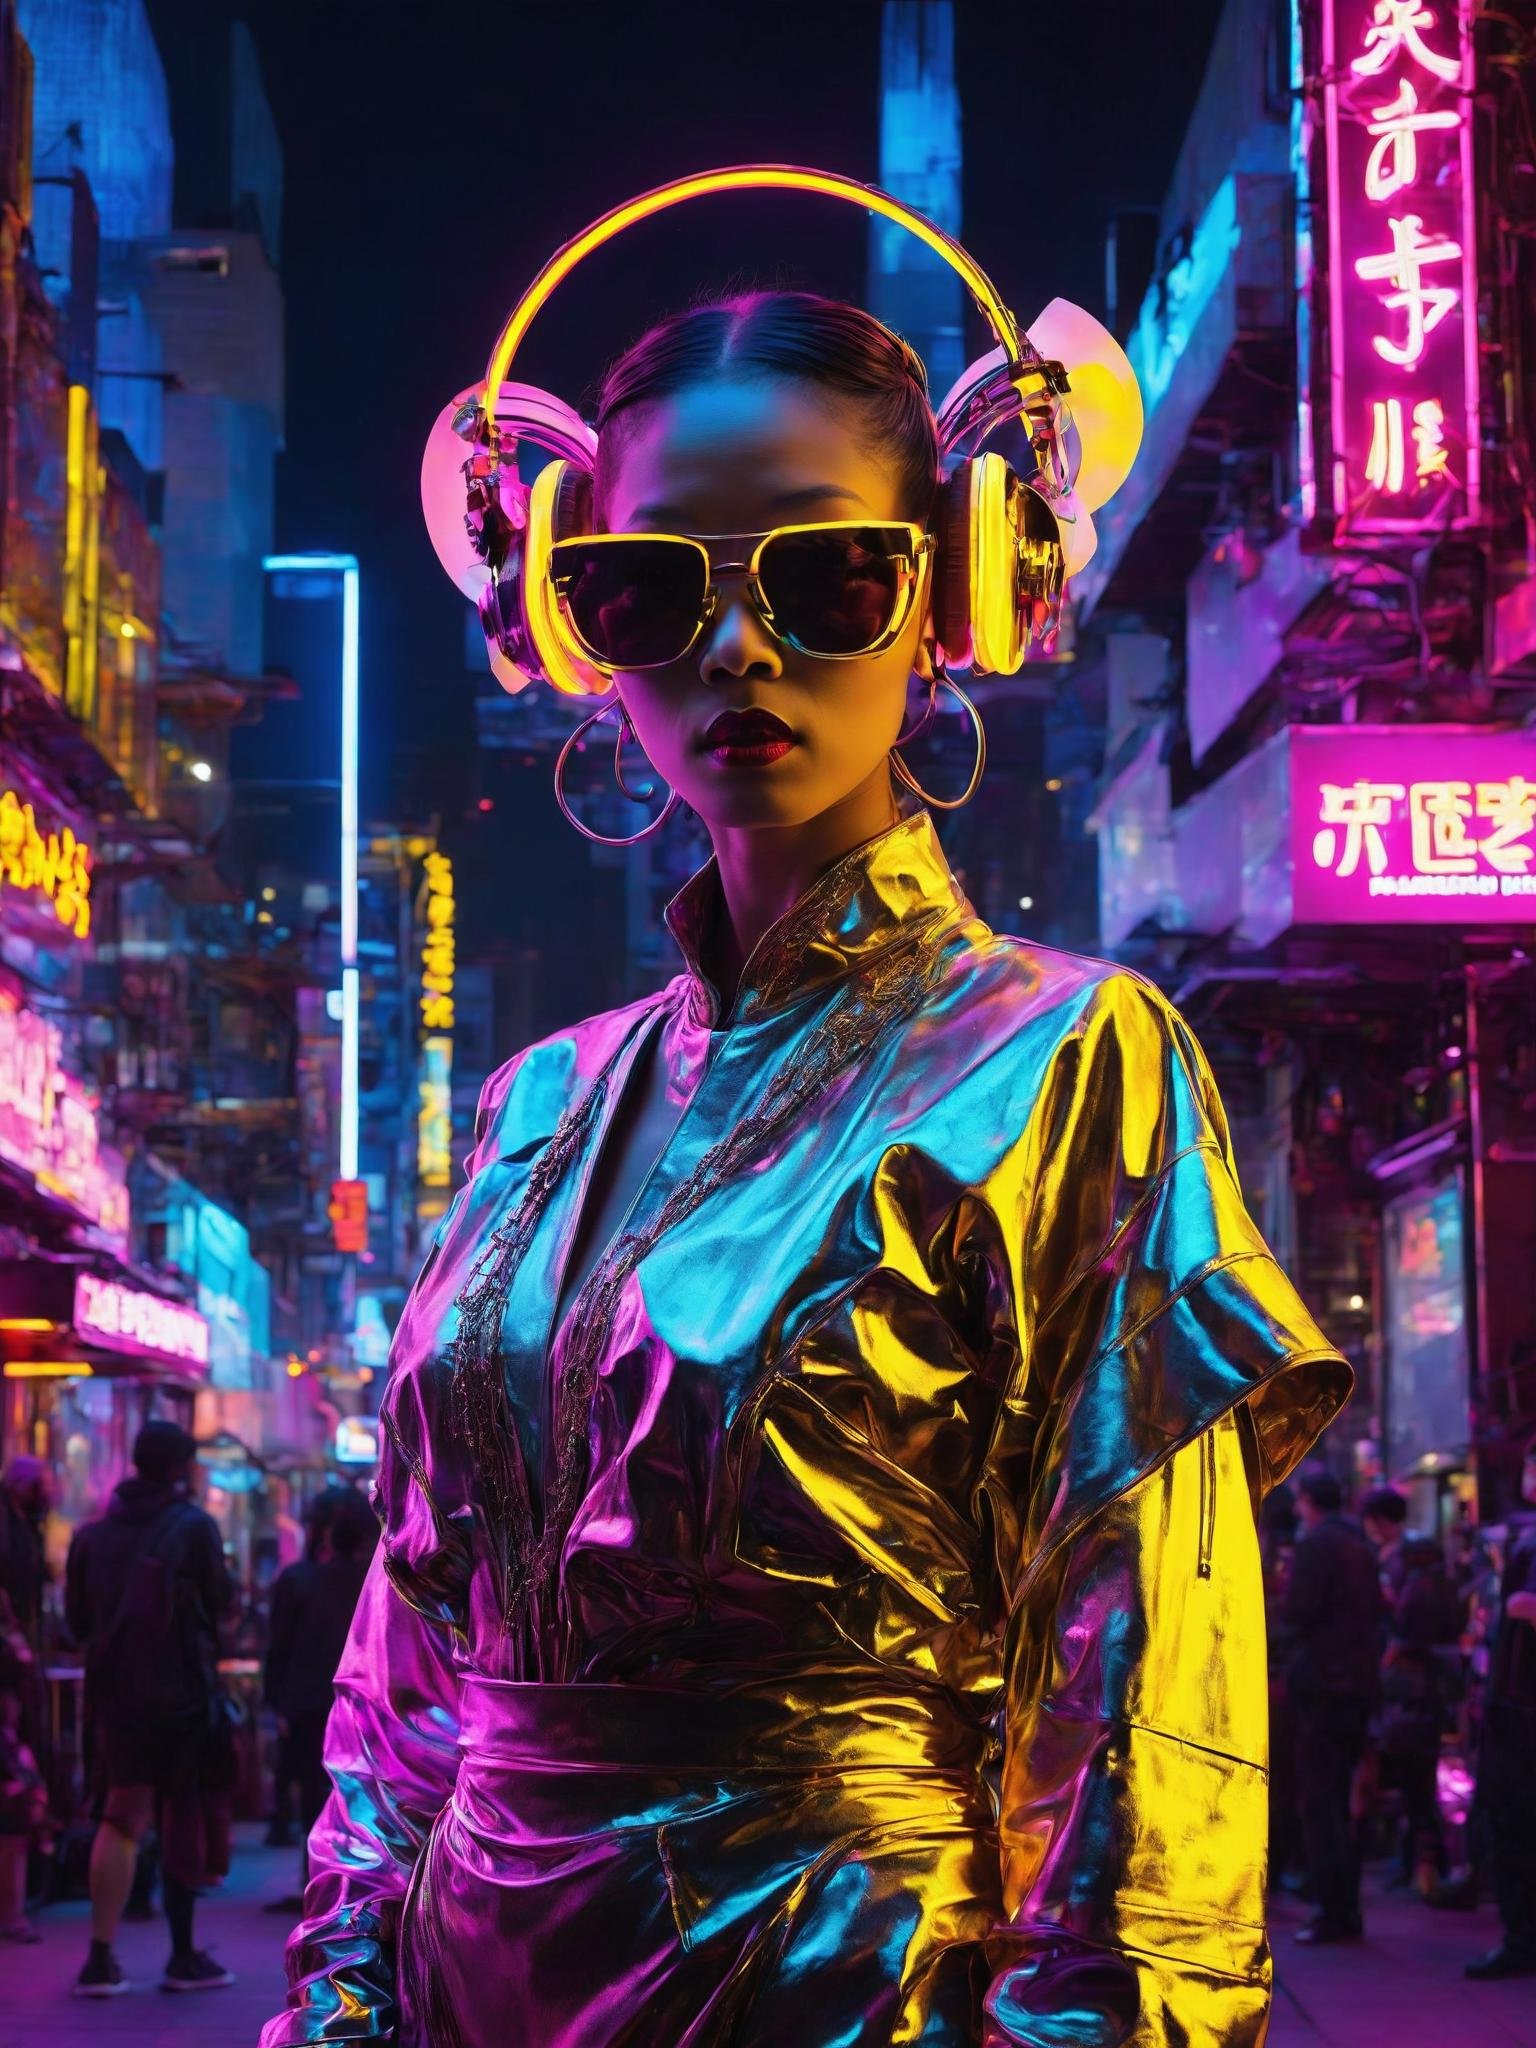 A cyberpunk street performer, blending the soulful tunes of jazz with Zen philosophy, mesmerizes audiences in a neon-lit urban square. Their attire, a fusion of vintage jazz style and modern cyberpunk fashion, resonates with a hint of Eastern influence. Amidst swirling neon lights, their performance transcends genres, captivating passersby with a unique blend of American musical heritage and hints of tranquil Zen ambiance., <lora:ByteBlade:1>